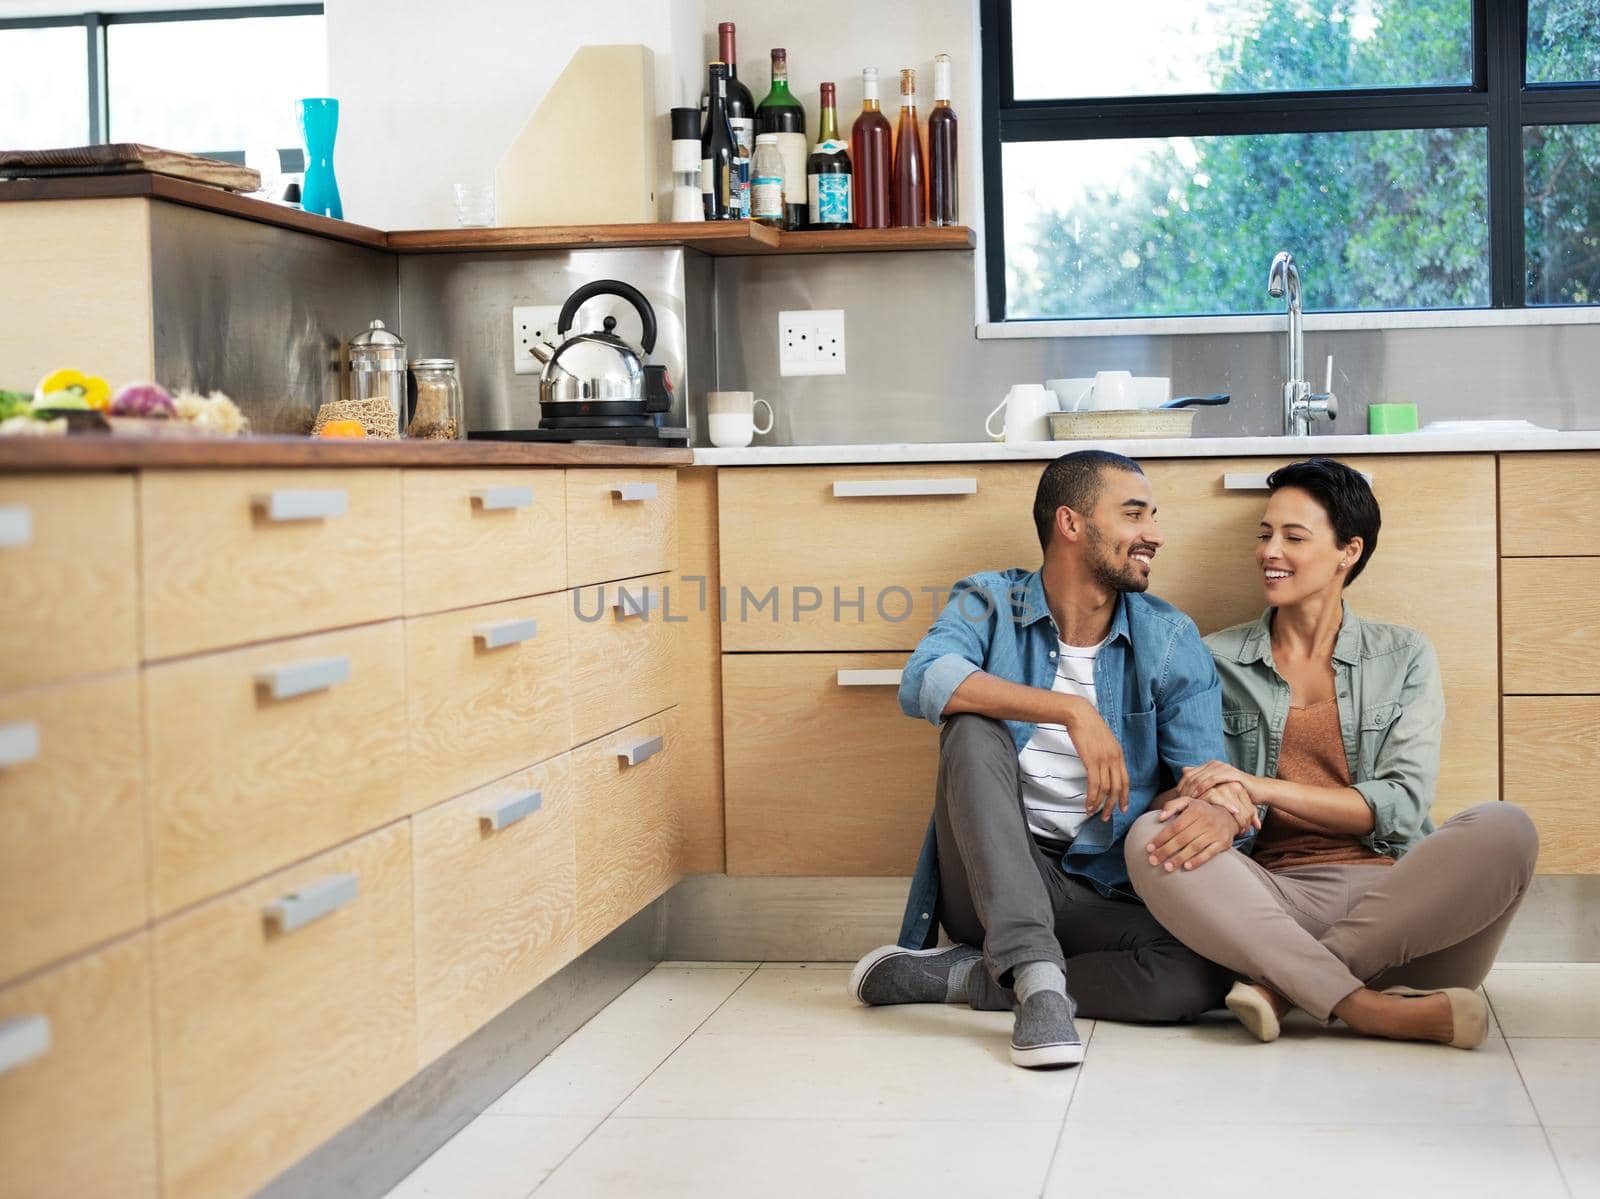 Shot of a smiling young couple sitting together on their kitchen floor